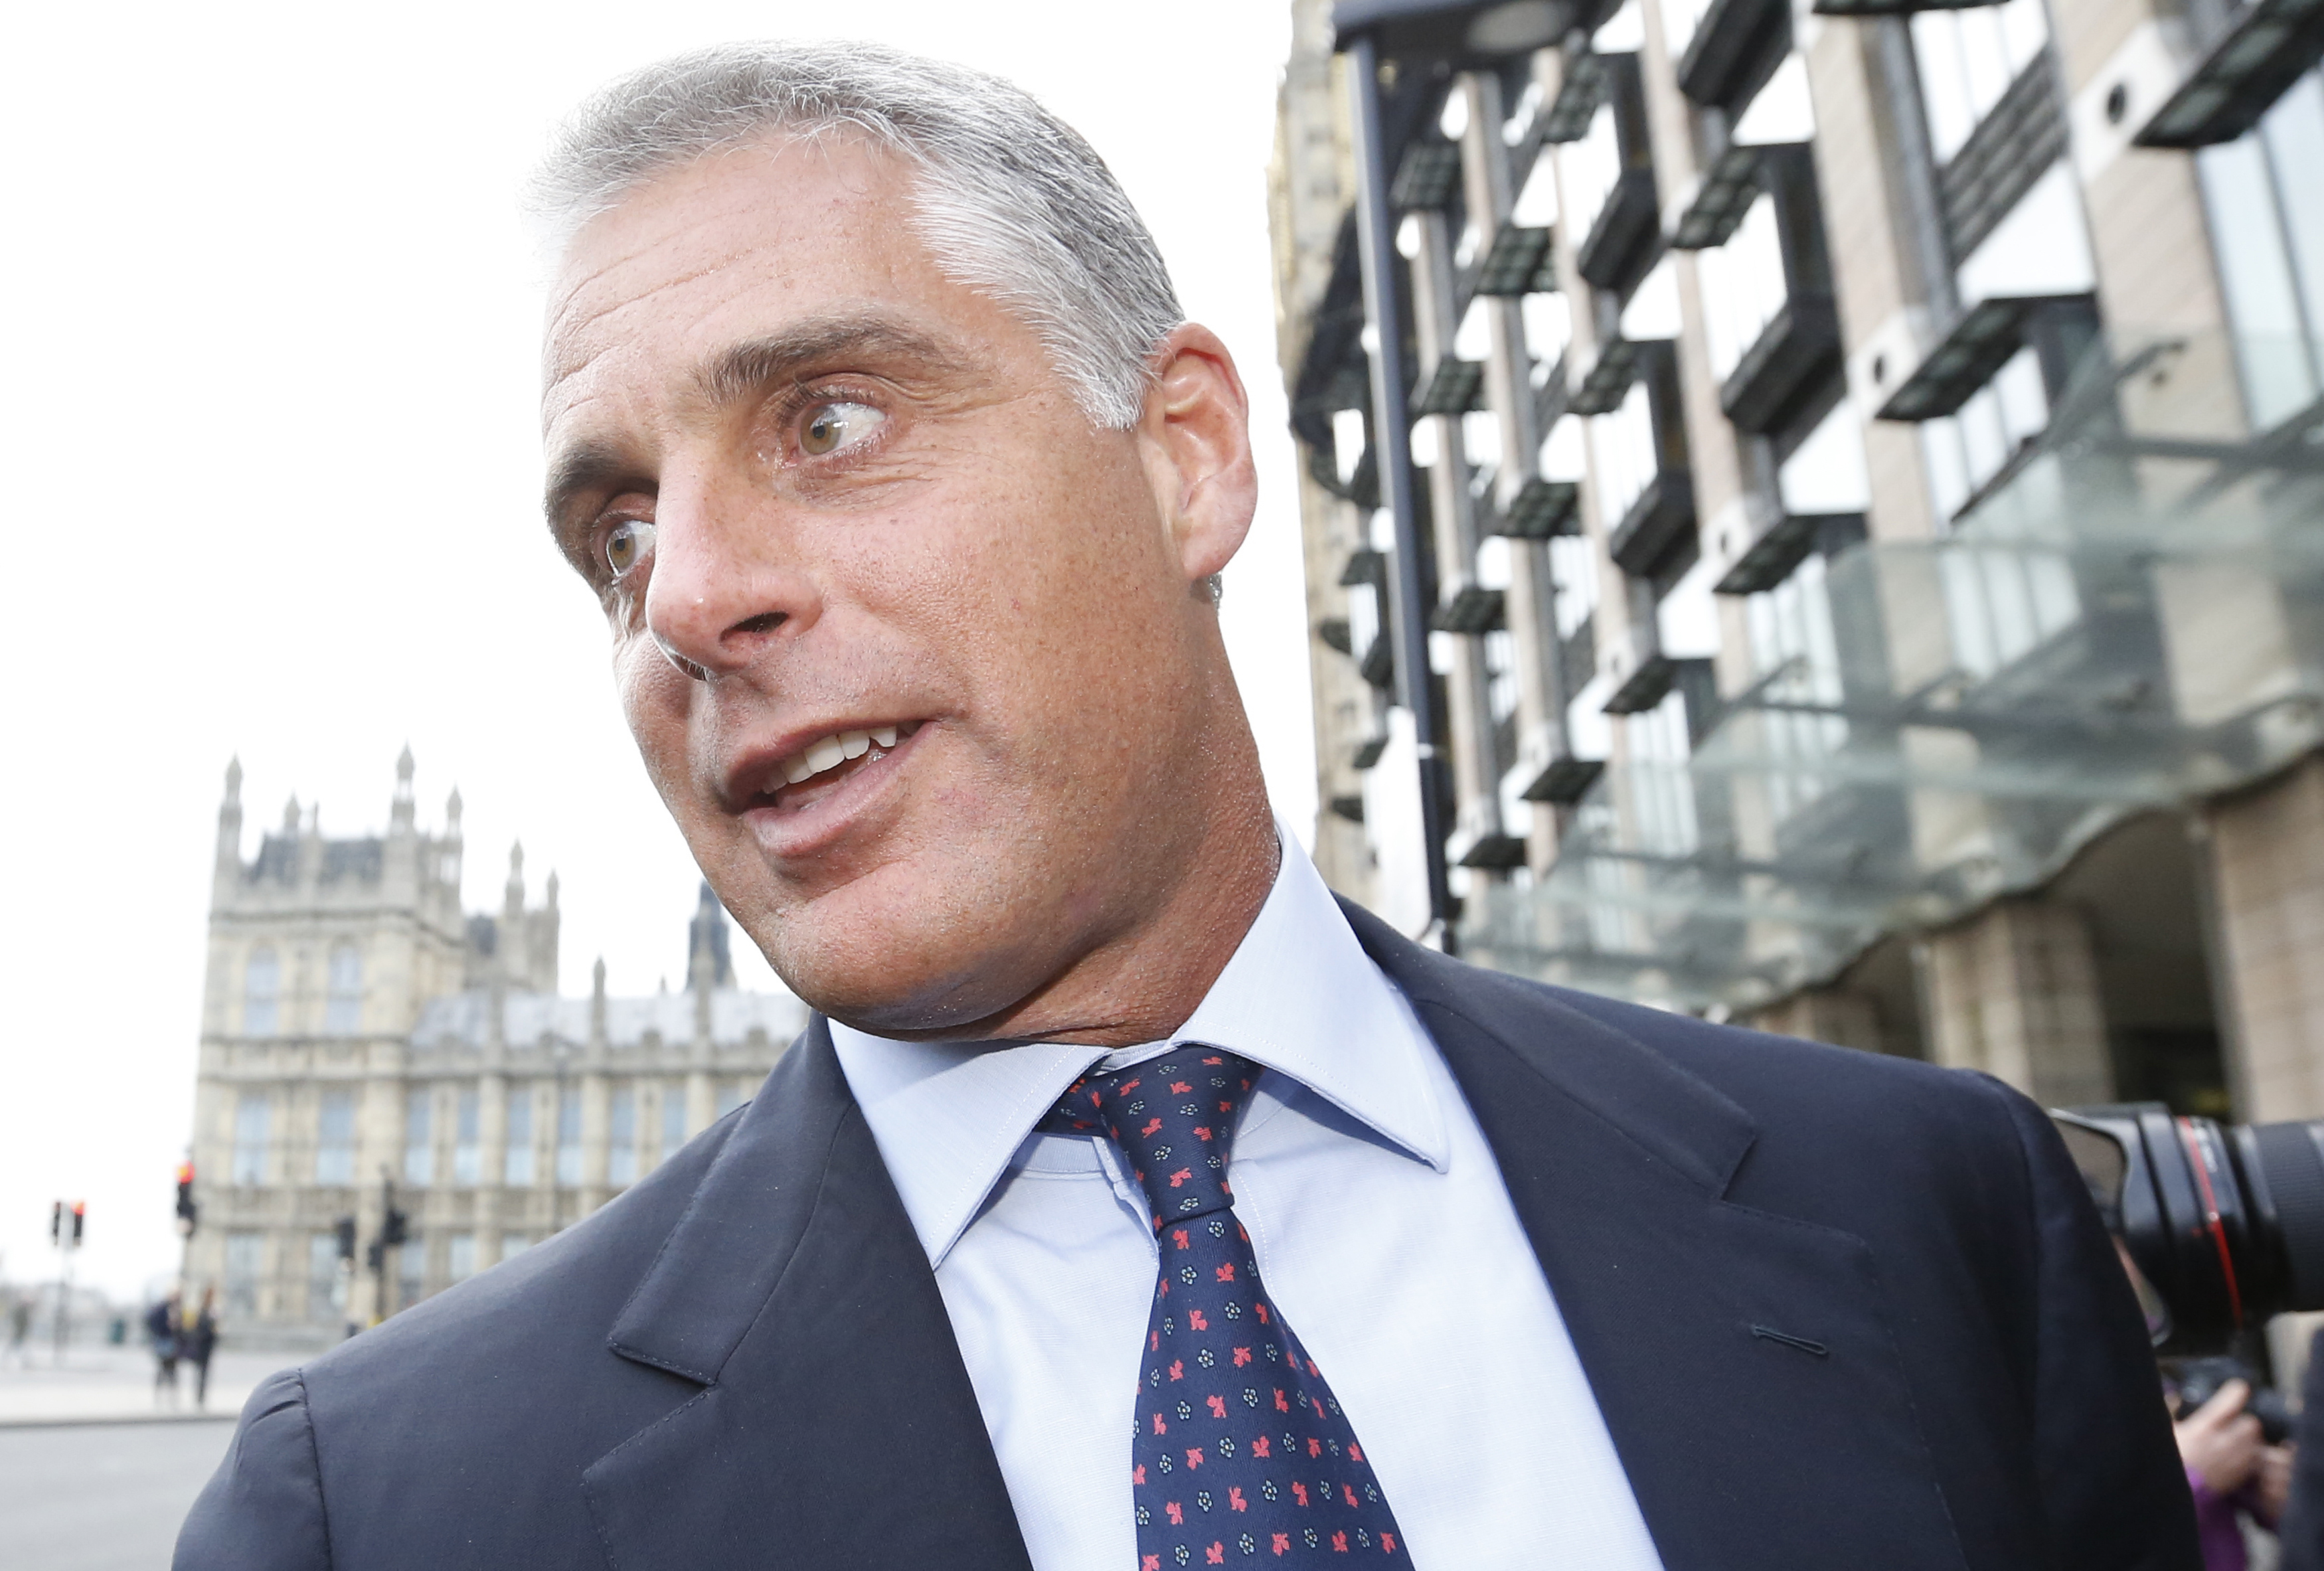 UBS chief executive Andrea Orcel leaves after attending a UK parliamentary inquiry into Libor interest rates in London